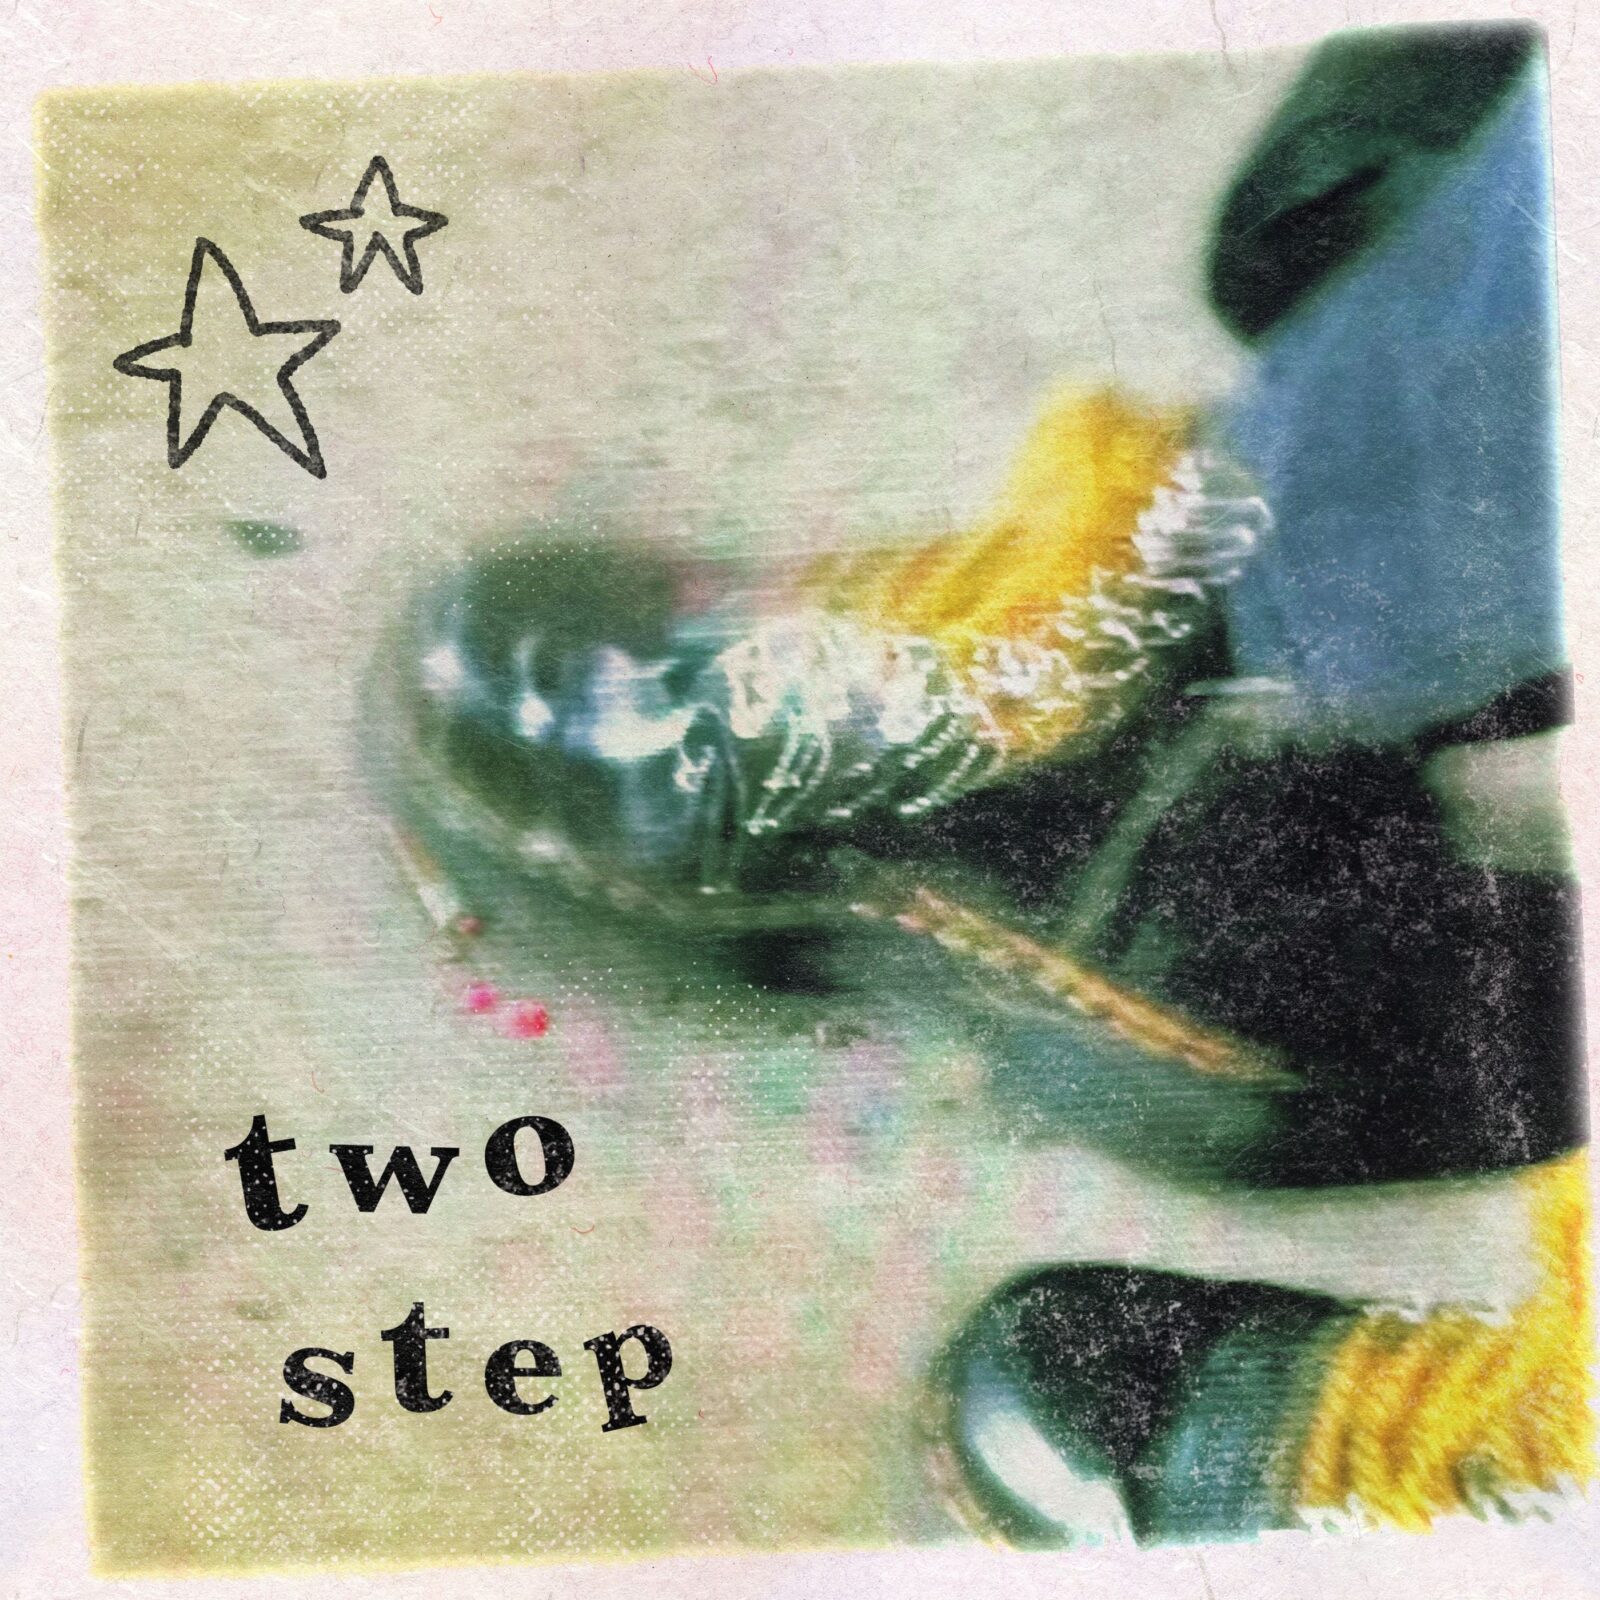 Single: mall goth – Two Step